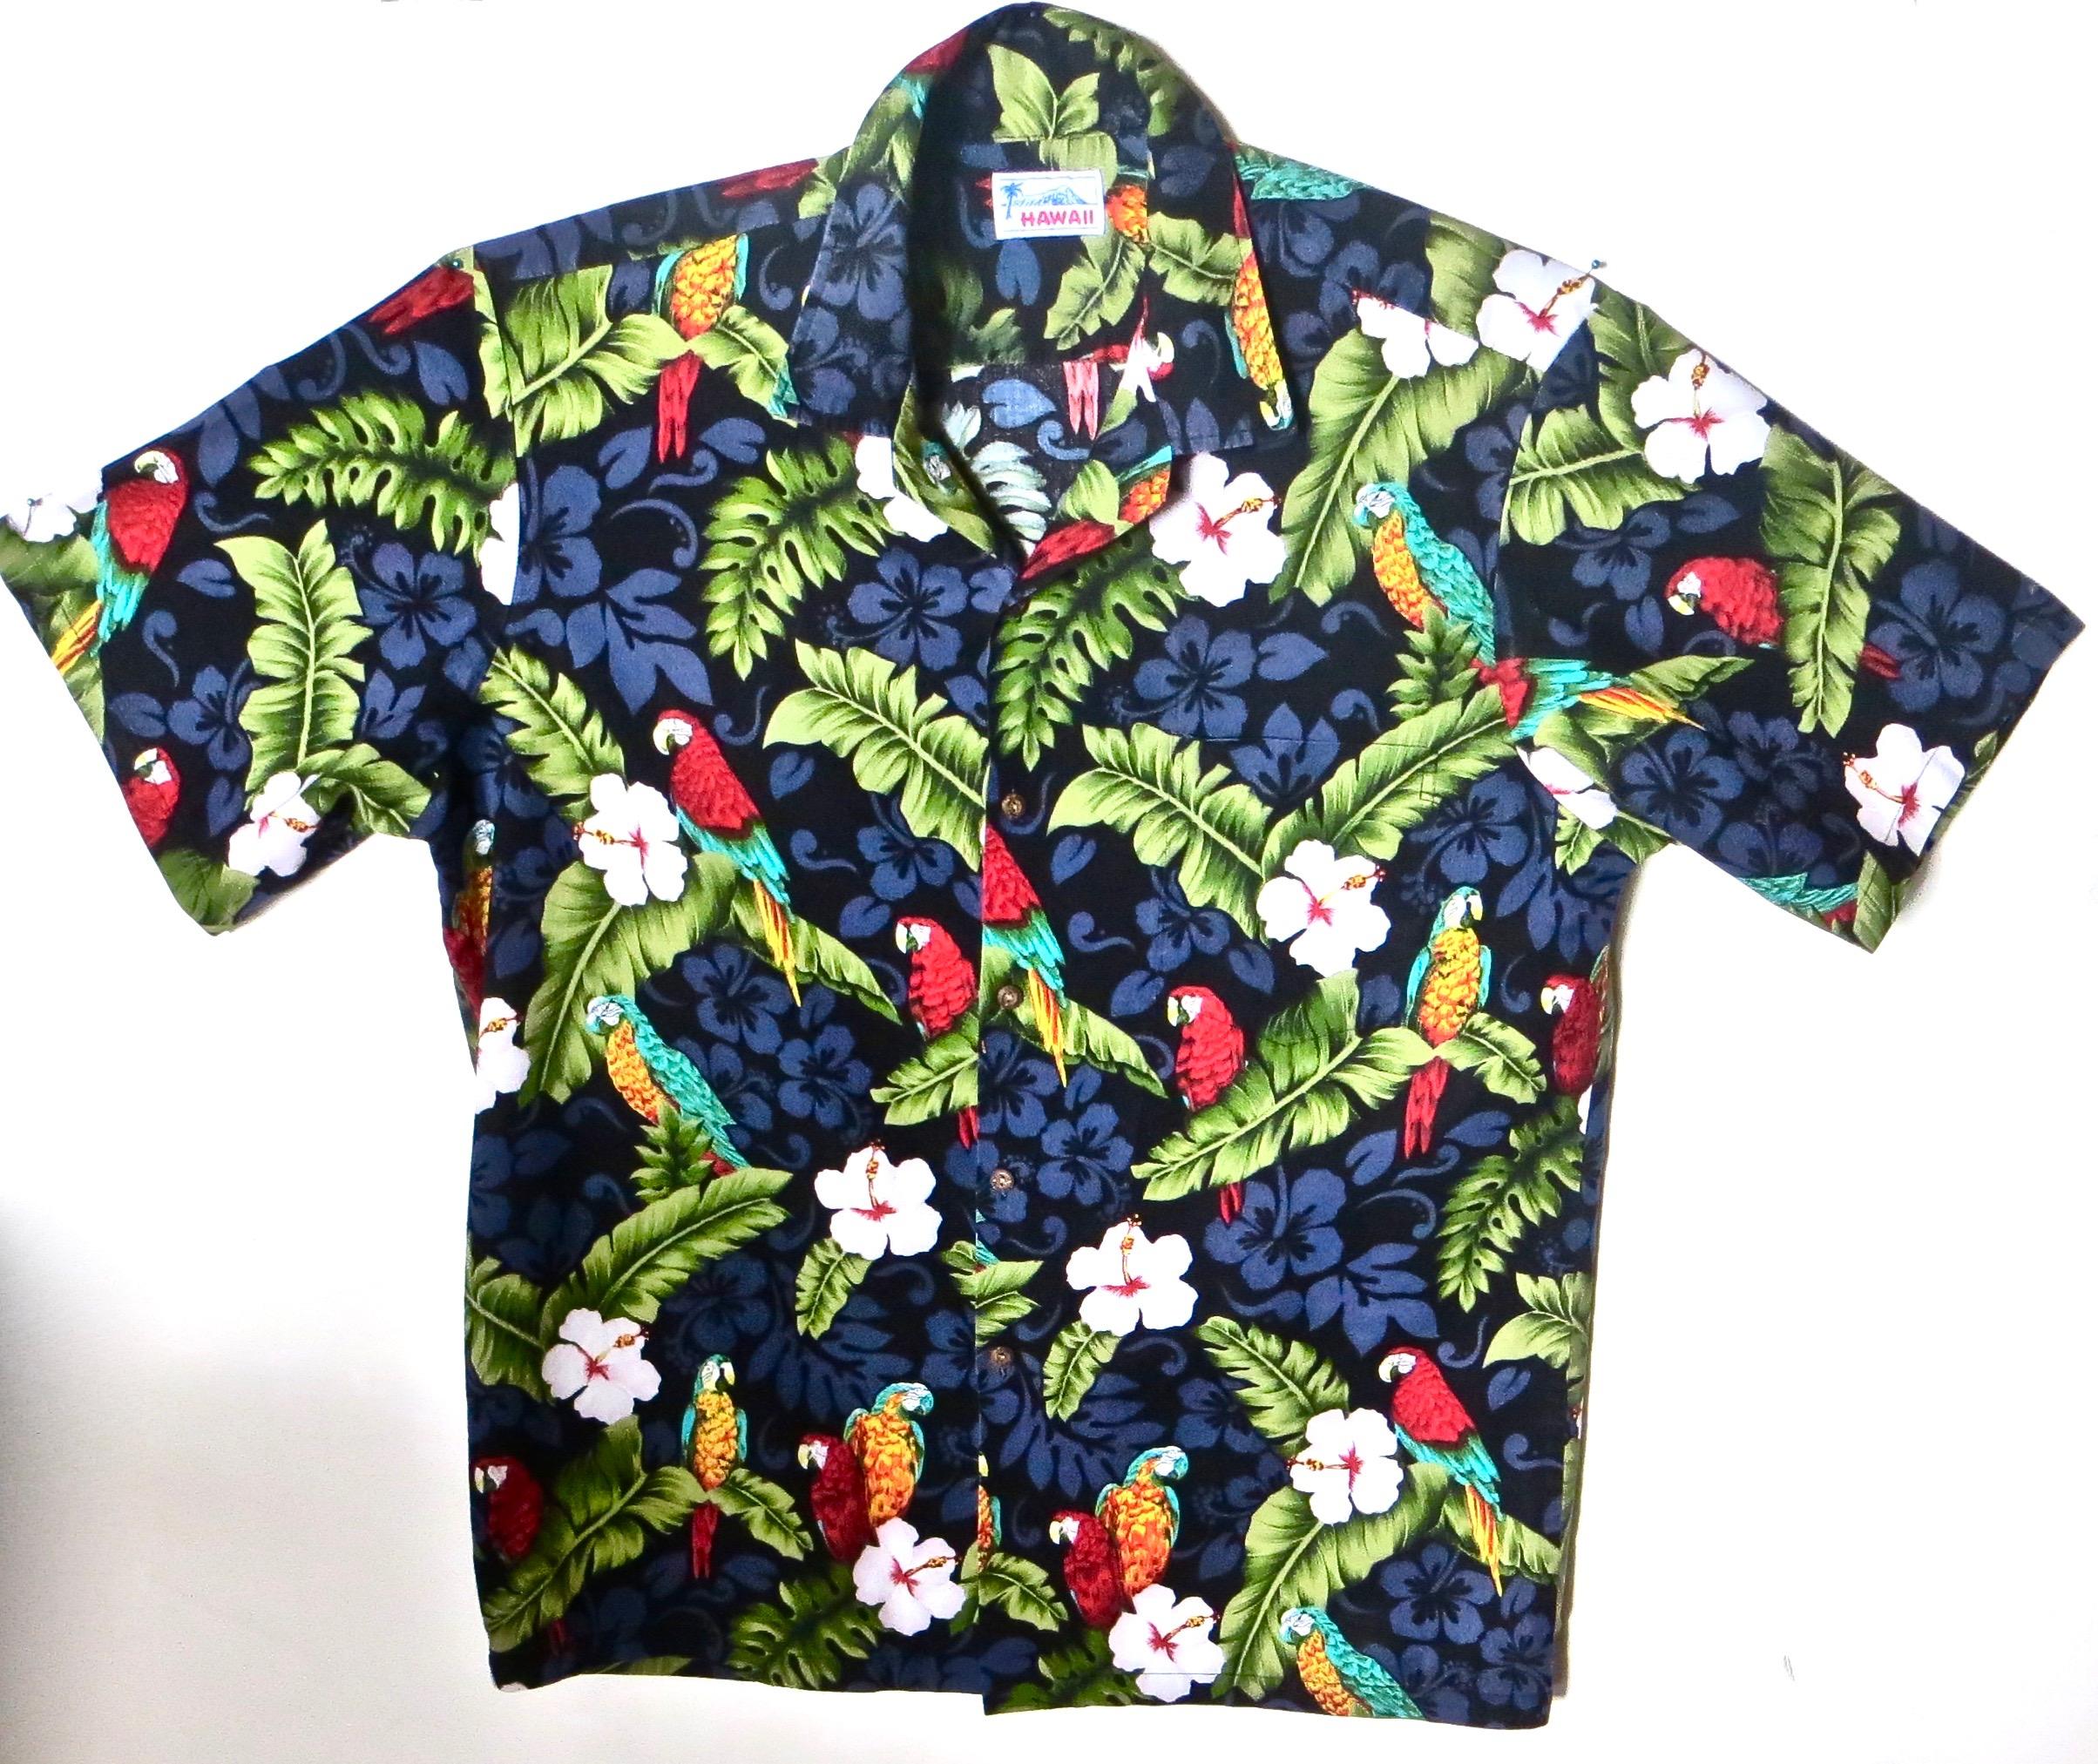 Machine-Made Vintage Hawaiian Shirt, Parrot and Floral Design, Men's X-Large, Circa 1970's For Sale